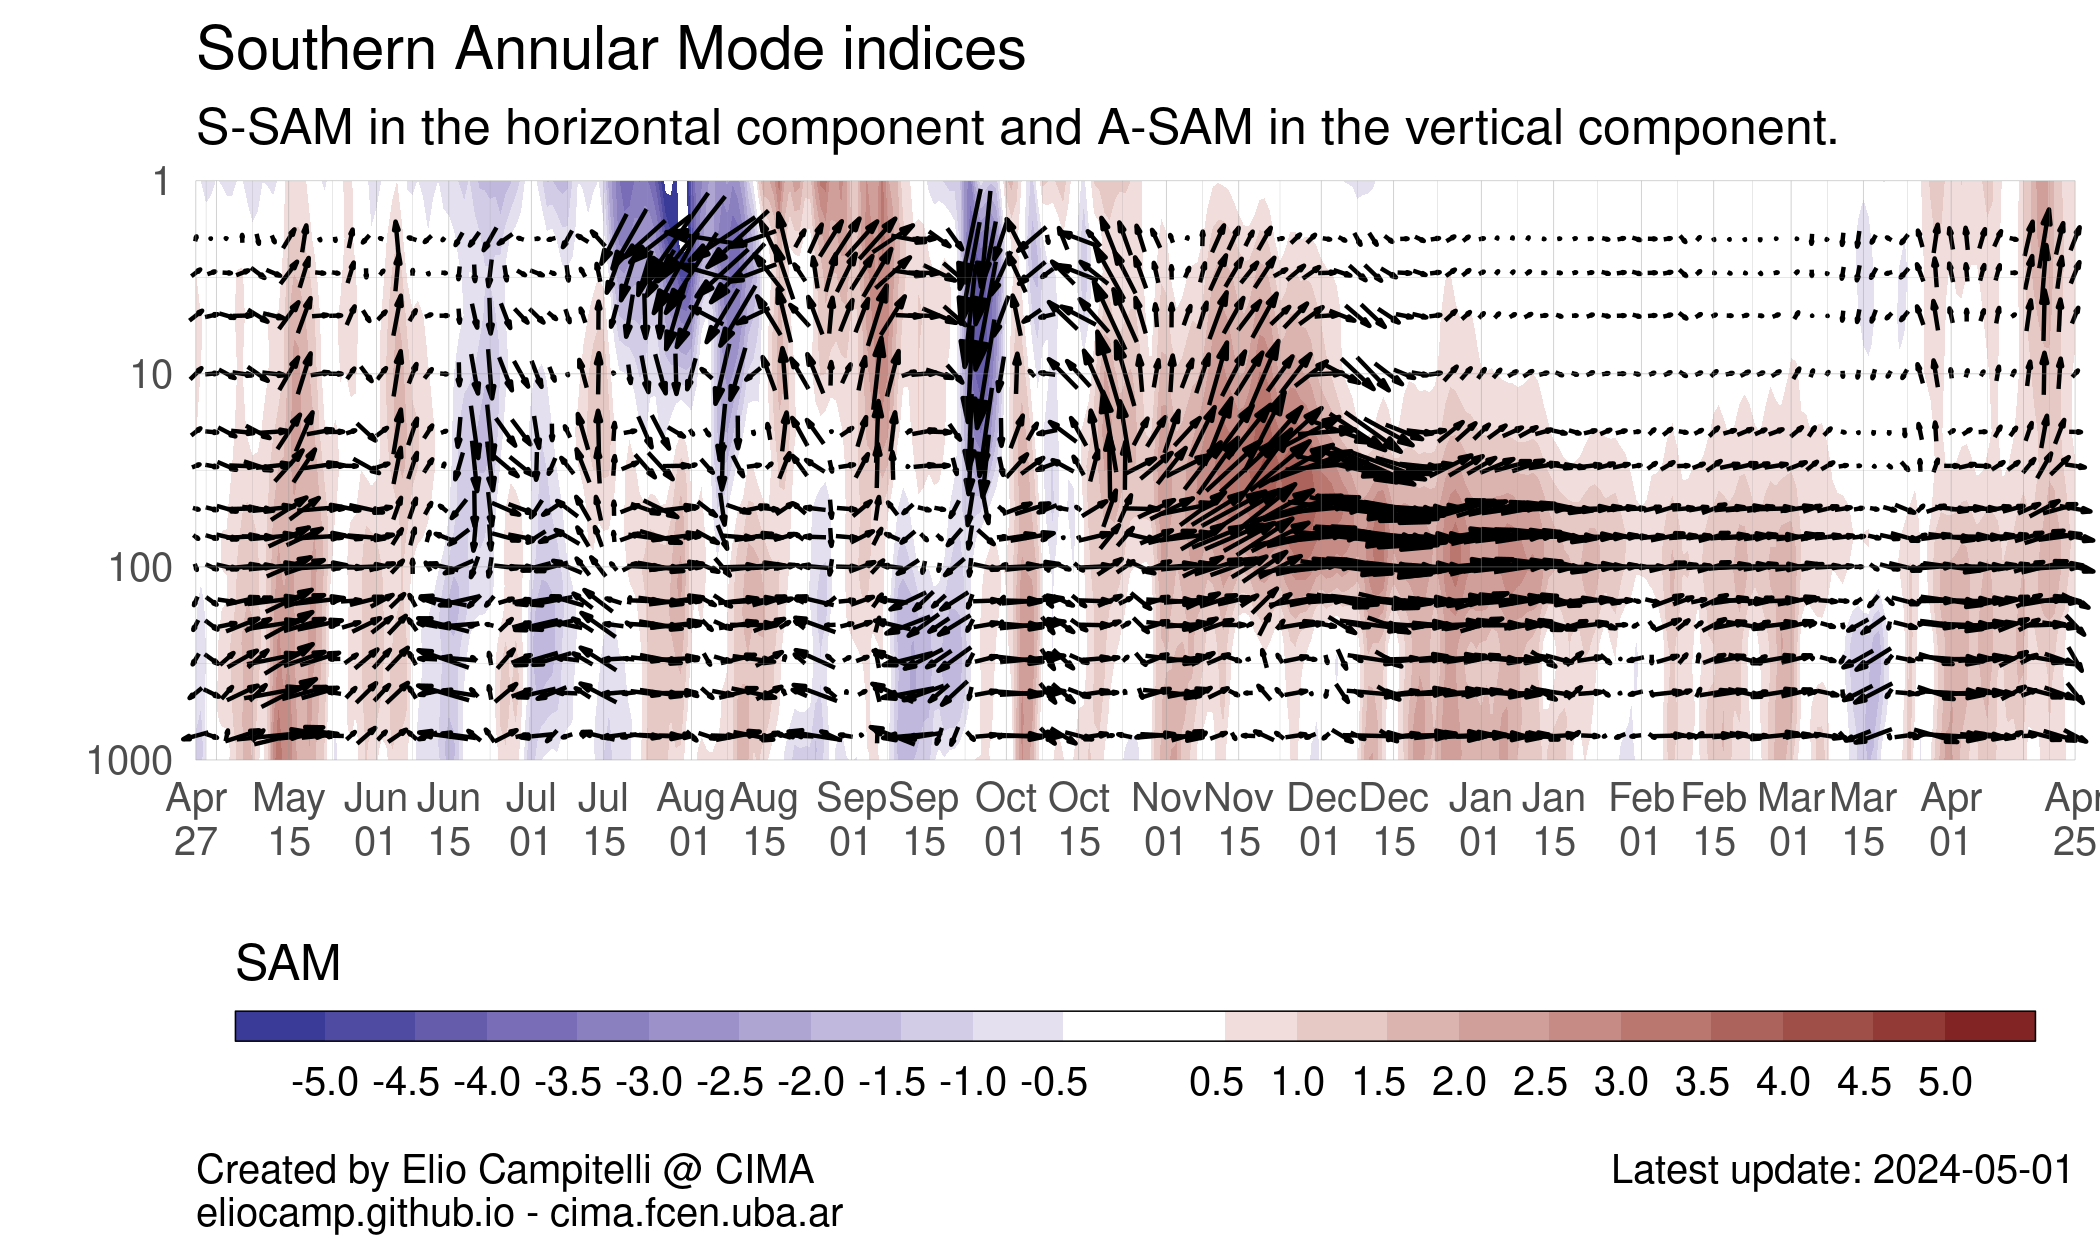 Vertical cross-section of the SAM, S-SAM and A-SAM indices for the last 12 months.